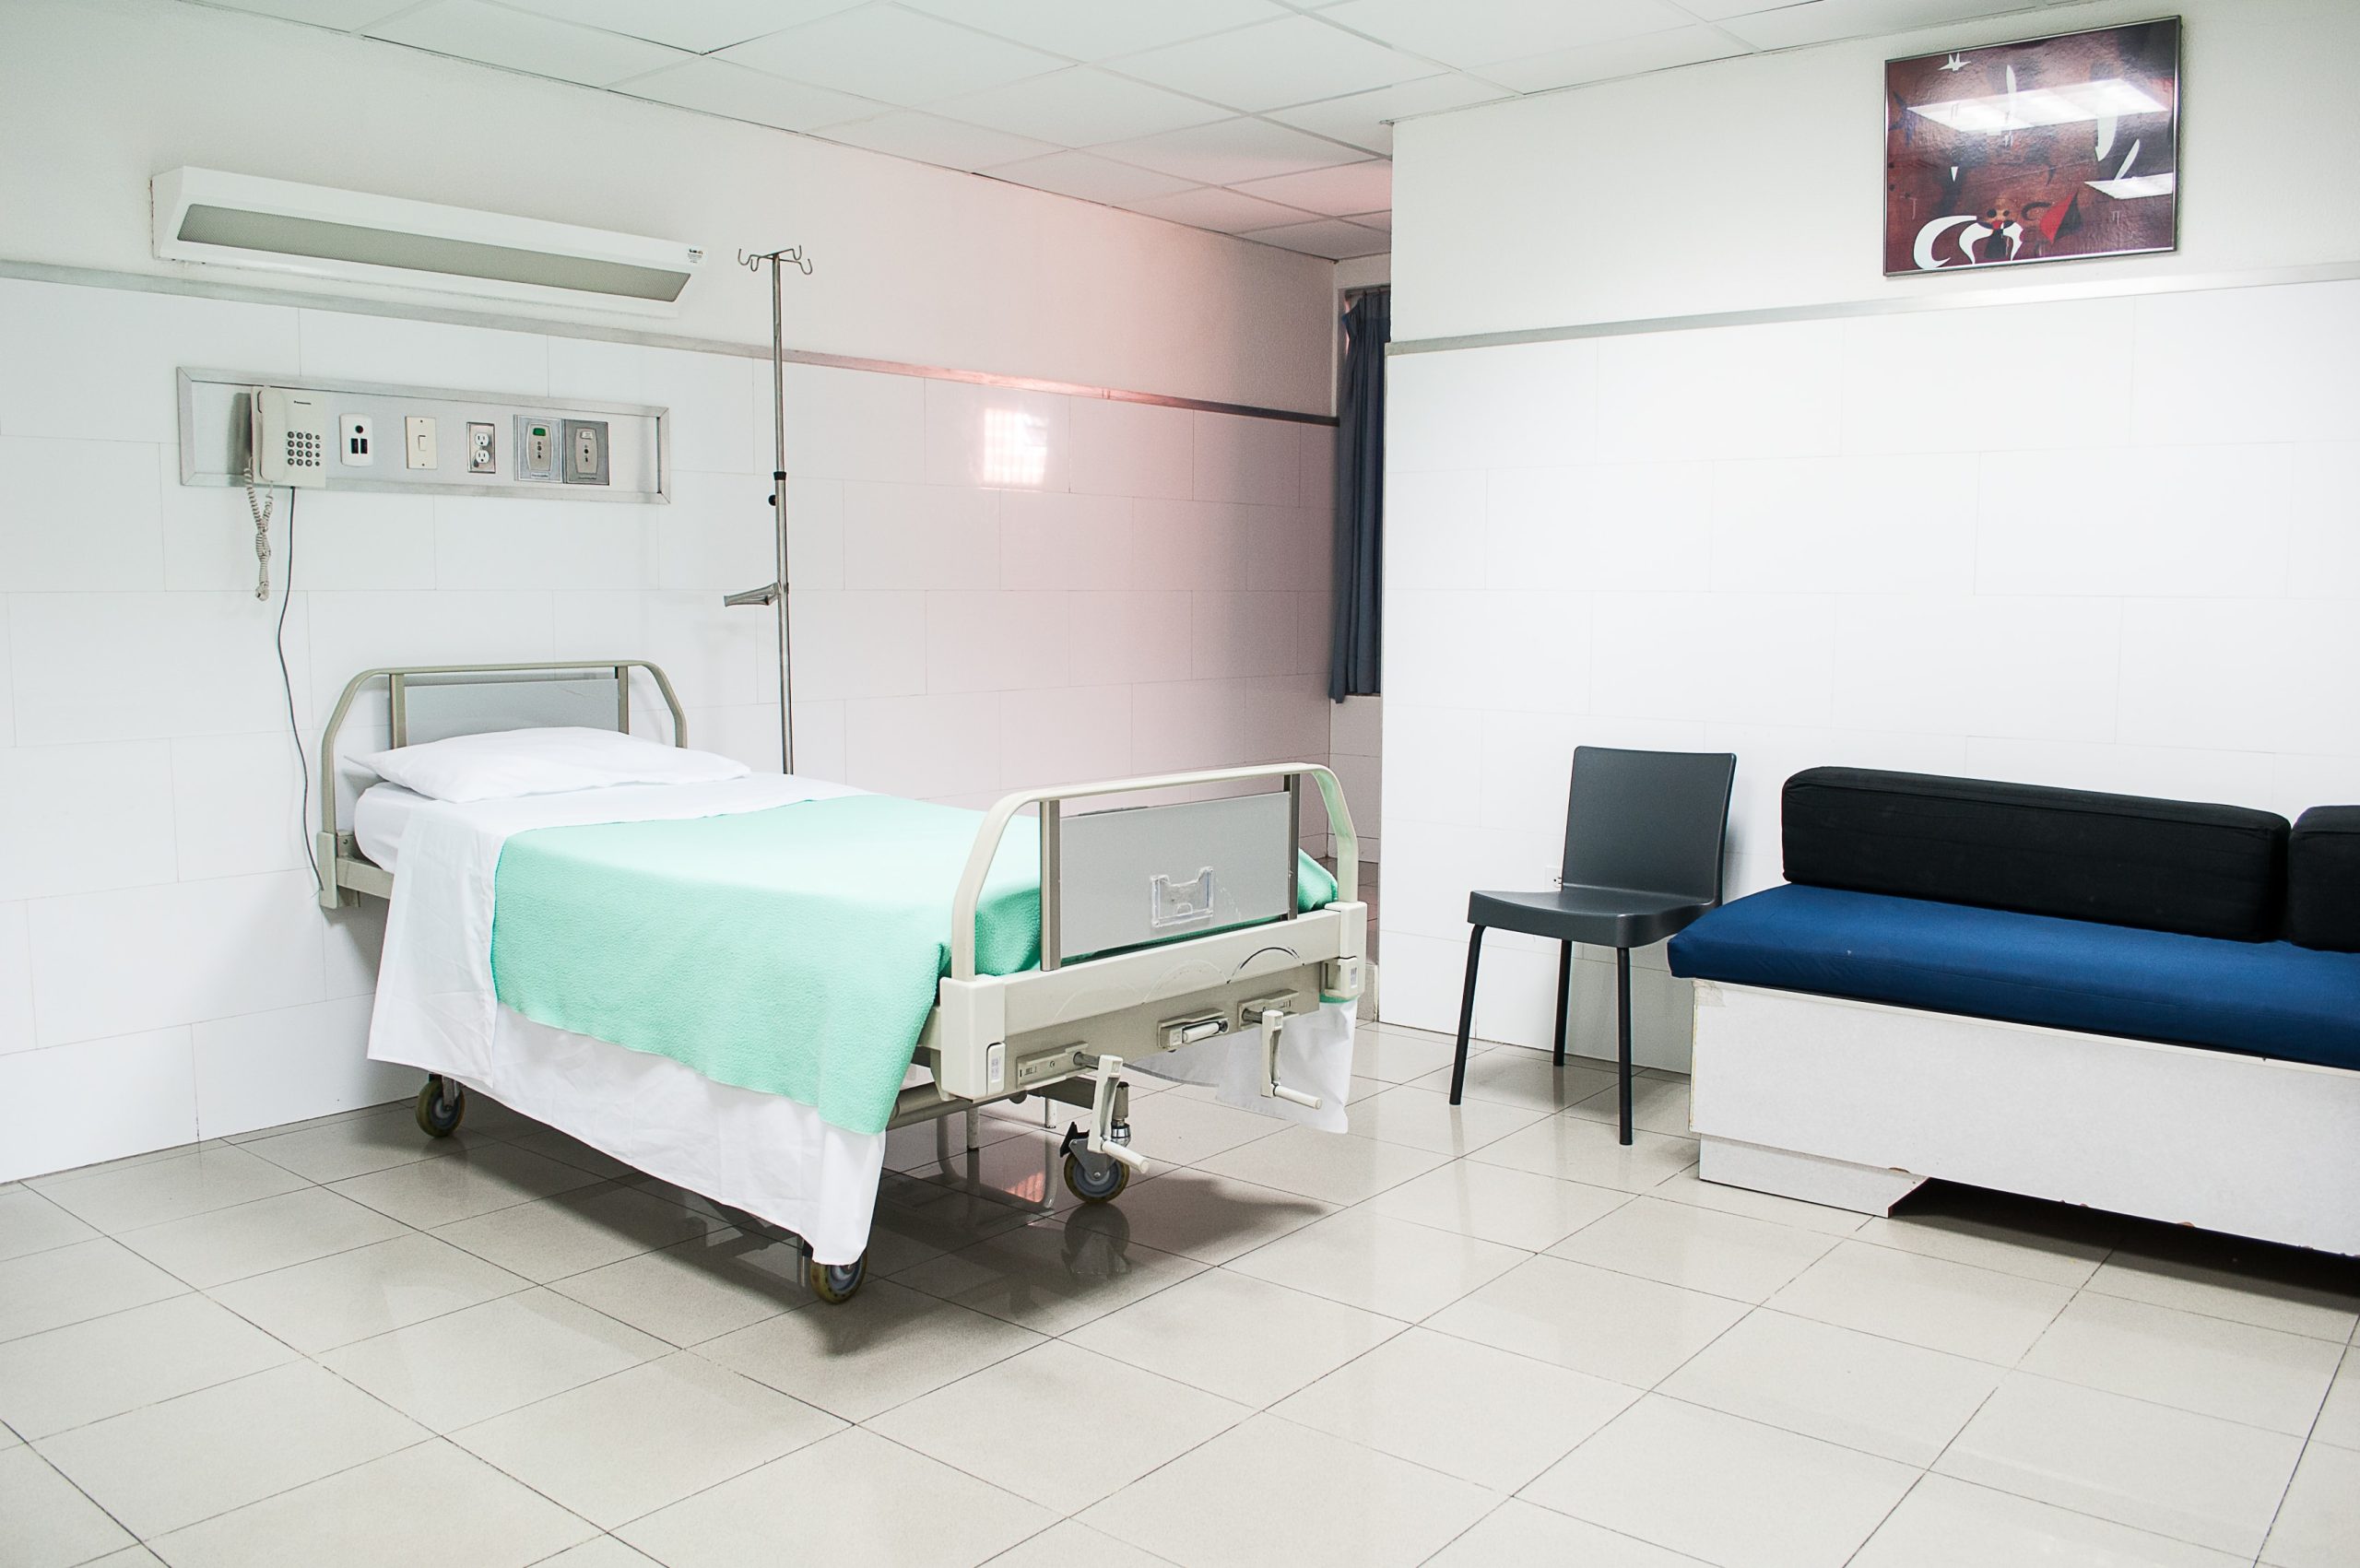 Picture of a empty bed in a hospital ward